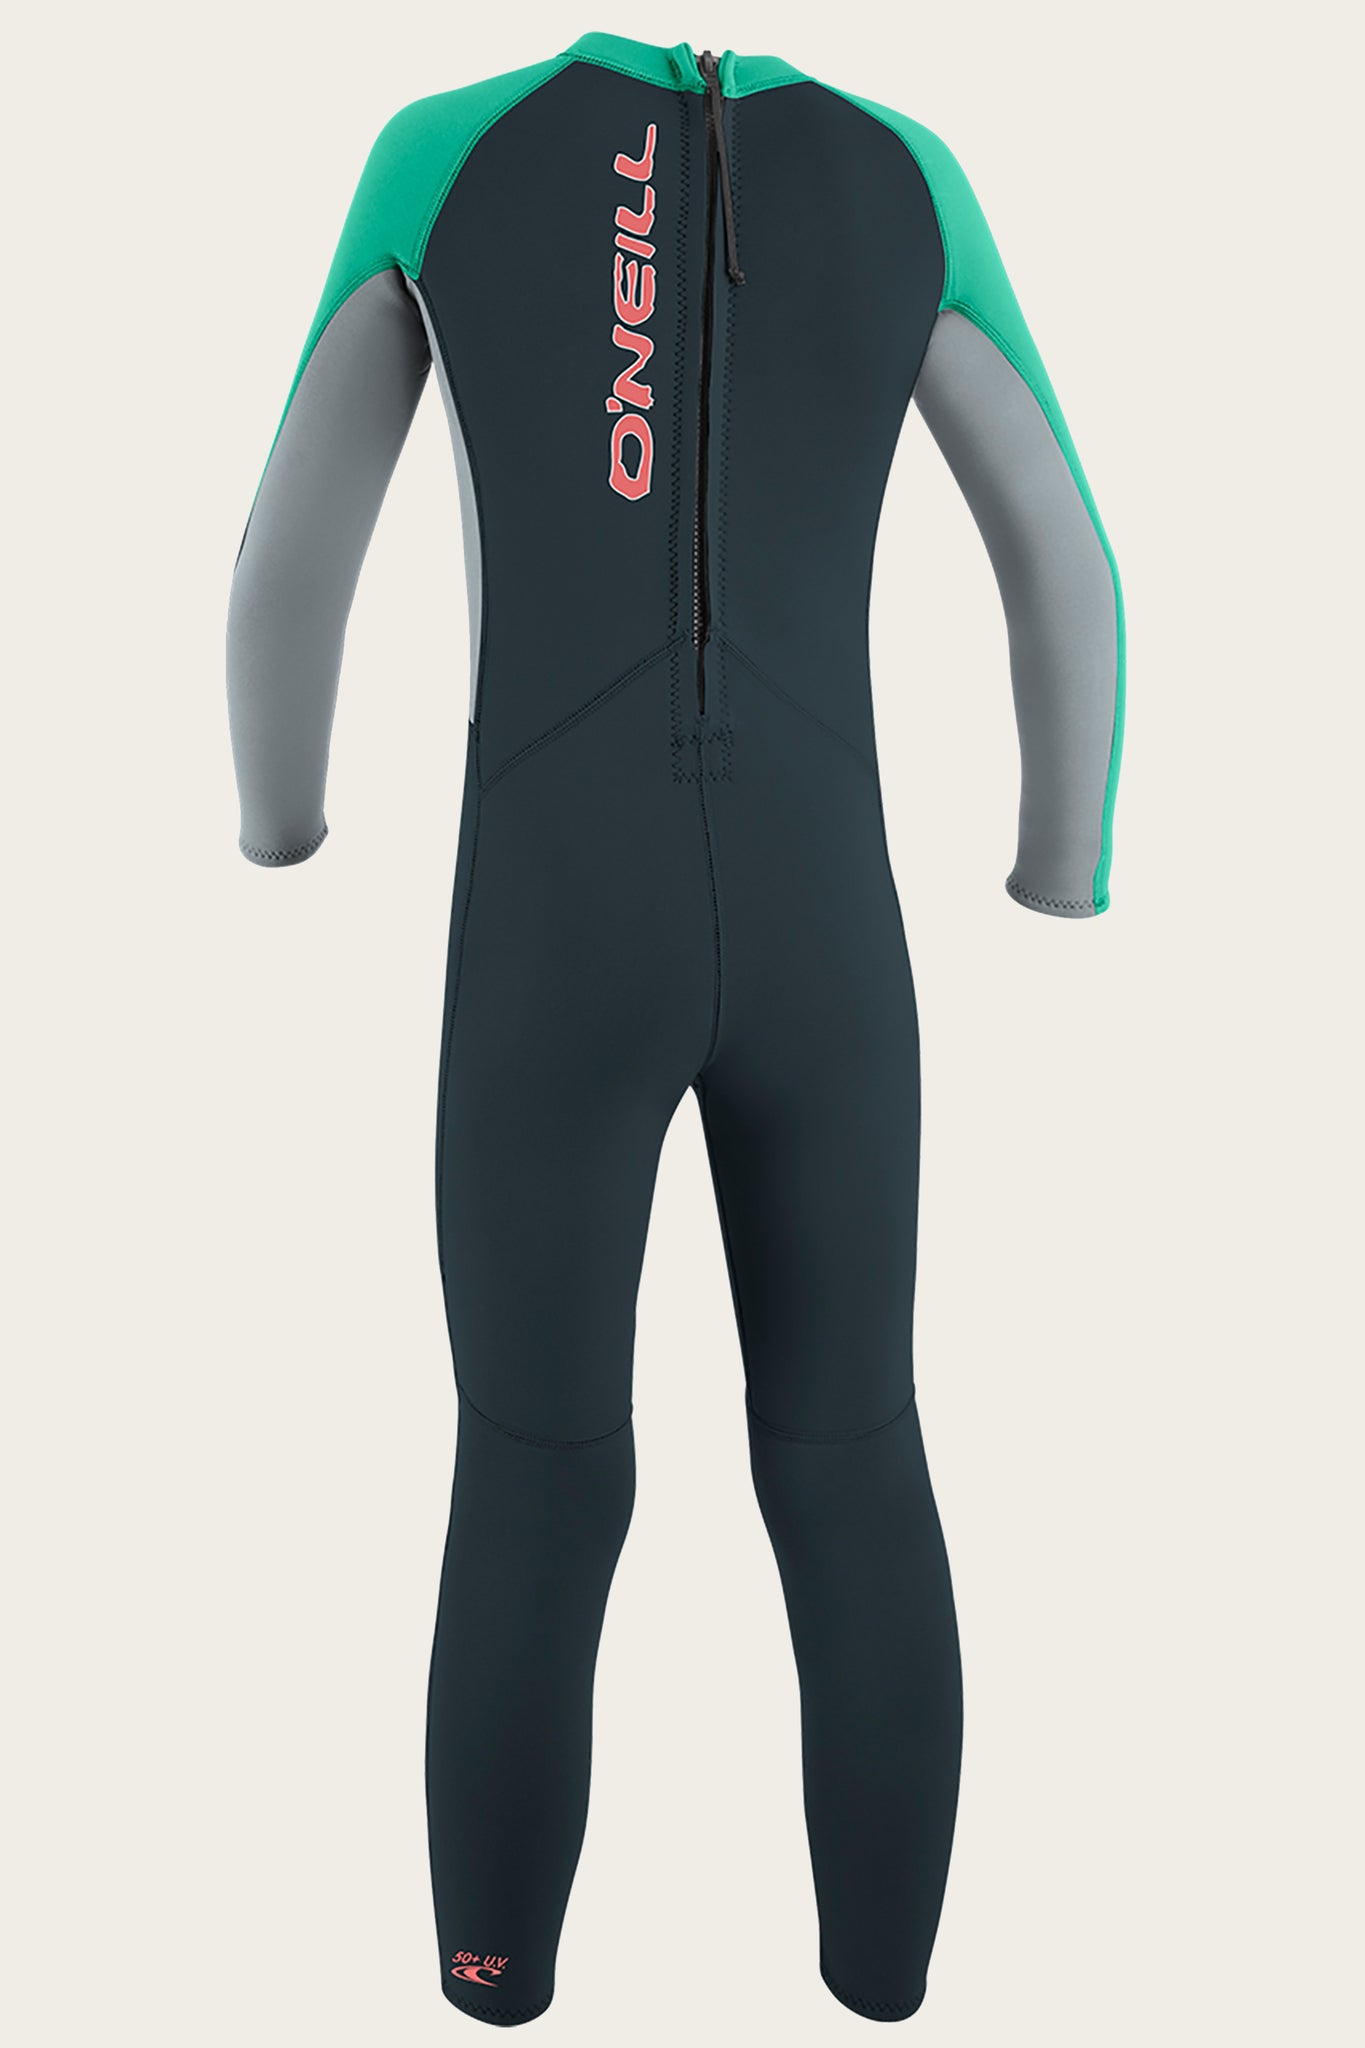 Toddler Reactor Ii 2Mm Back Zip Full Wetsuit - Slate/Coolrgry/Seaglass | O'Neill